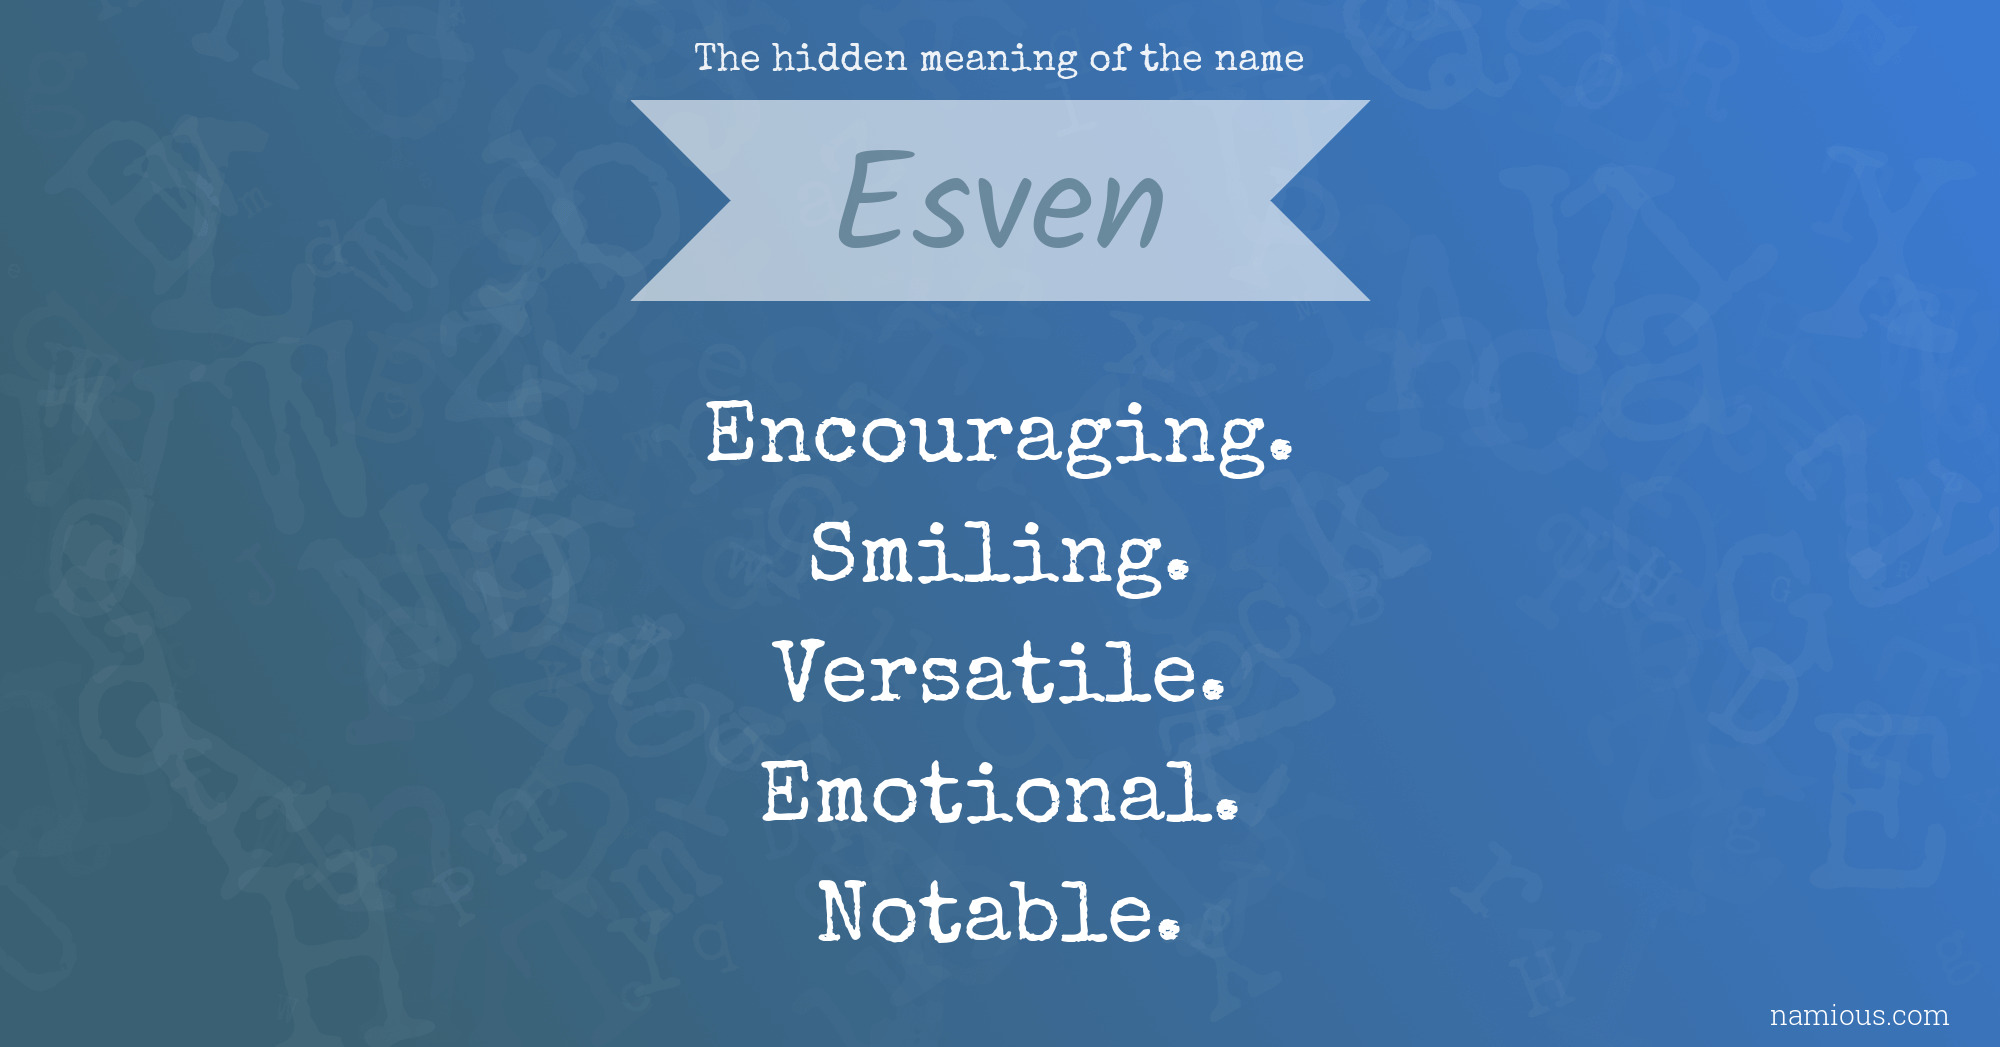 The hidden meaning of the name Esven